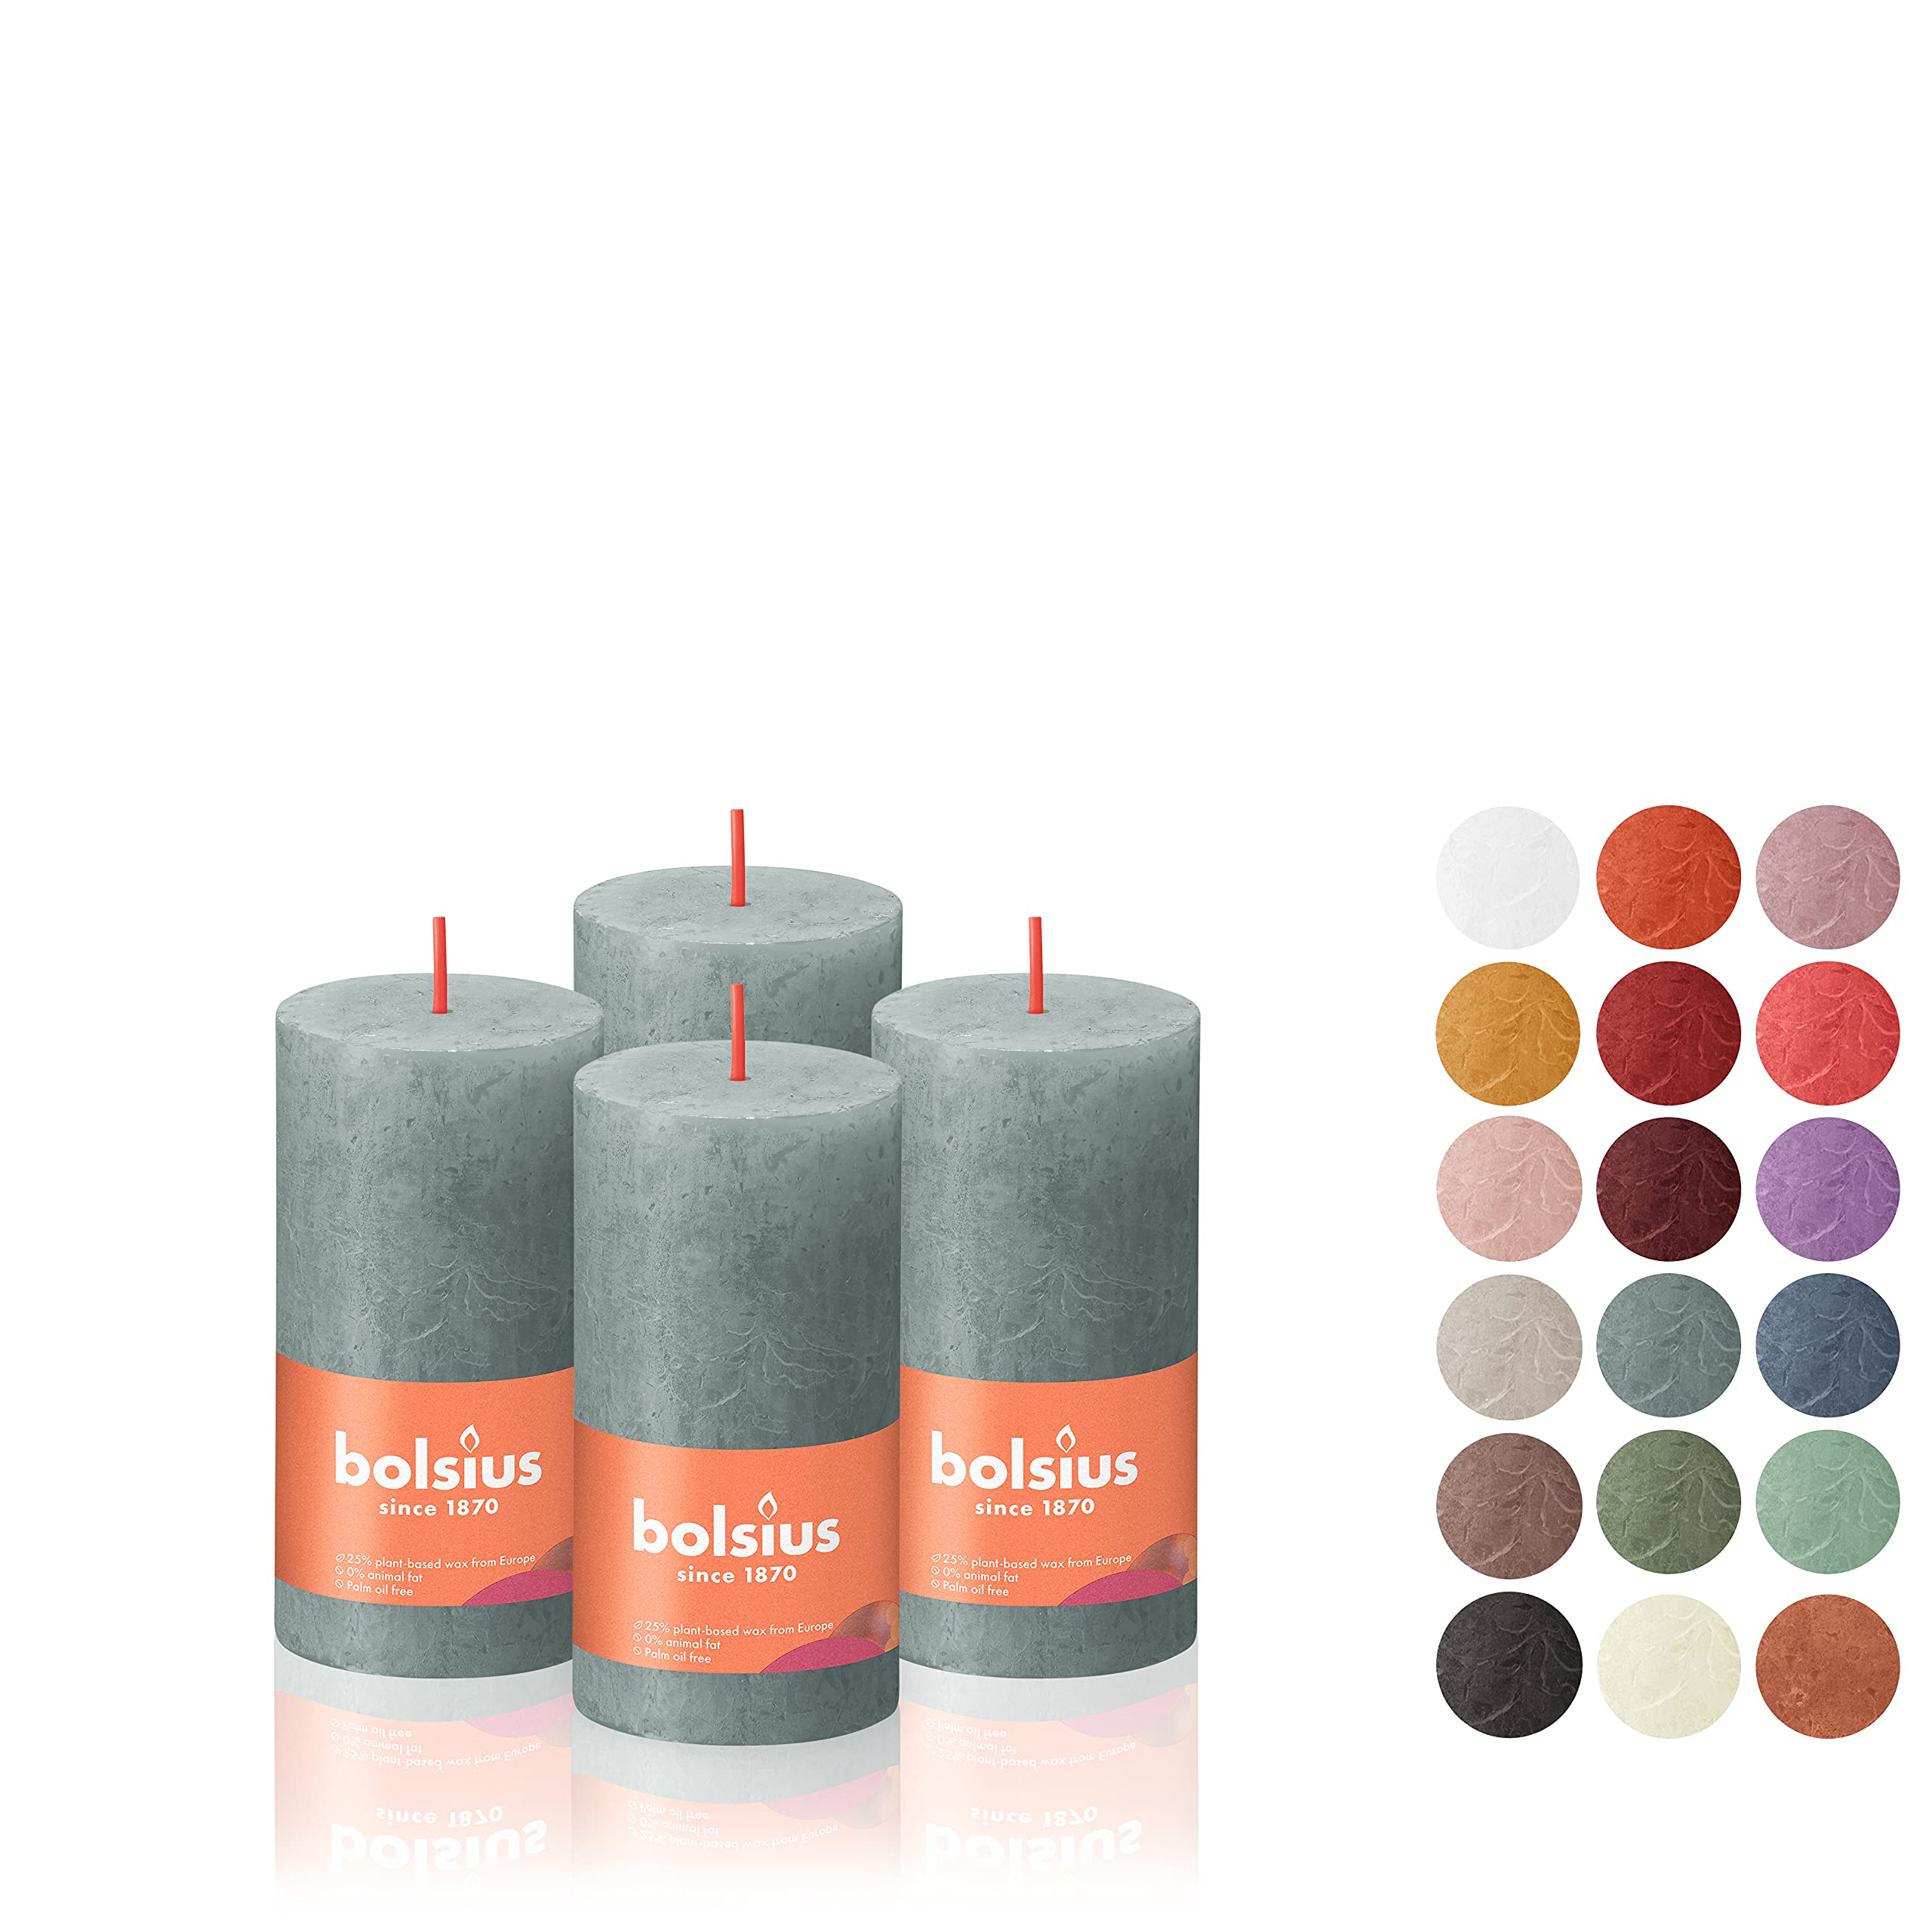 BOLSIUS 4 Pack Eucalyptus Green Rustic Pillar Candles - 2 X 4 Inches - Premium European Quality - Includes Natural Plant-Based Wax - Unscented Dripless Smokeless 30 Hour Party and Wedding Candles  - Acceptable